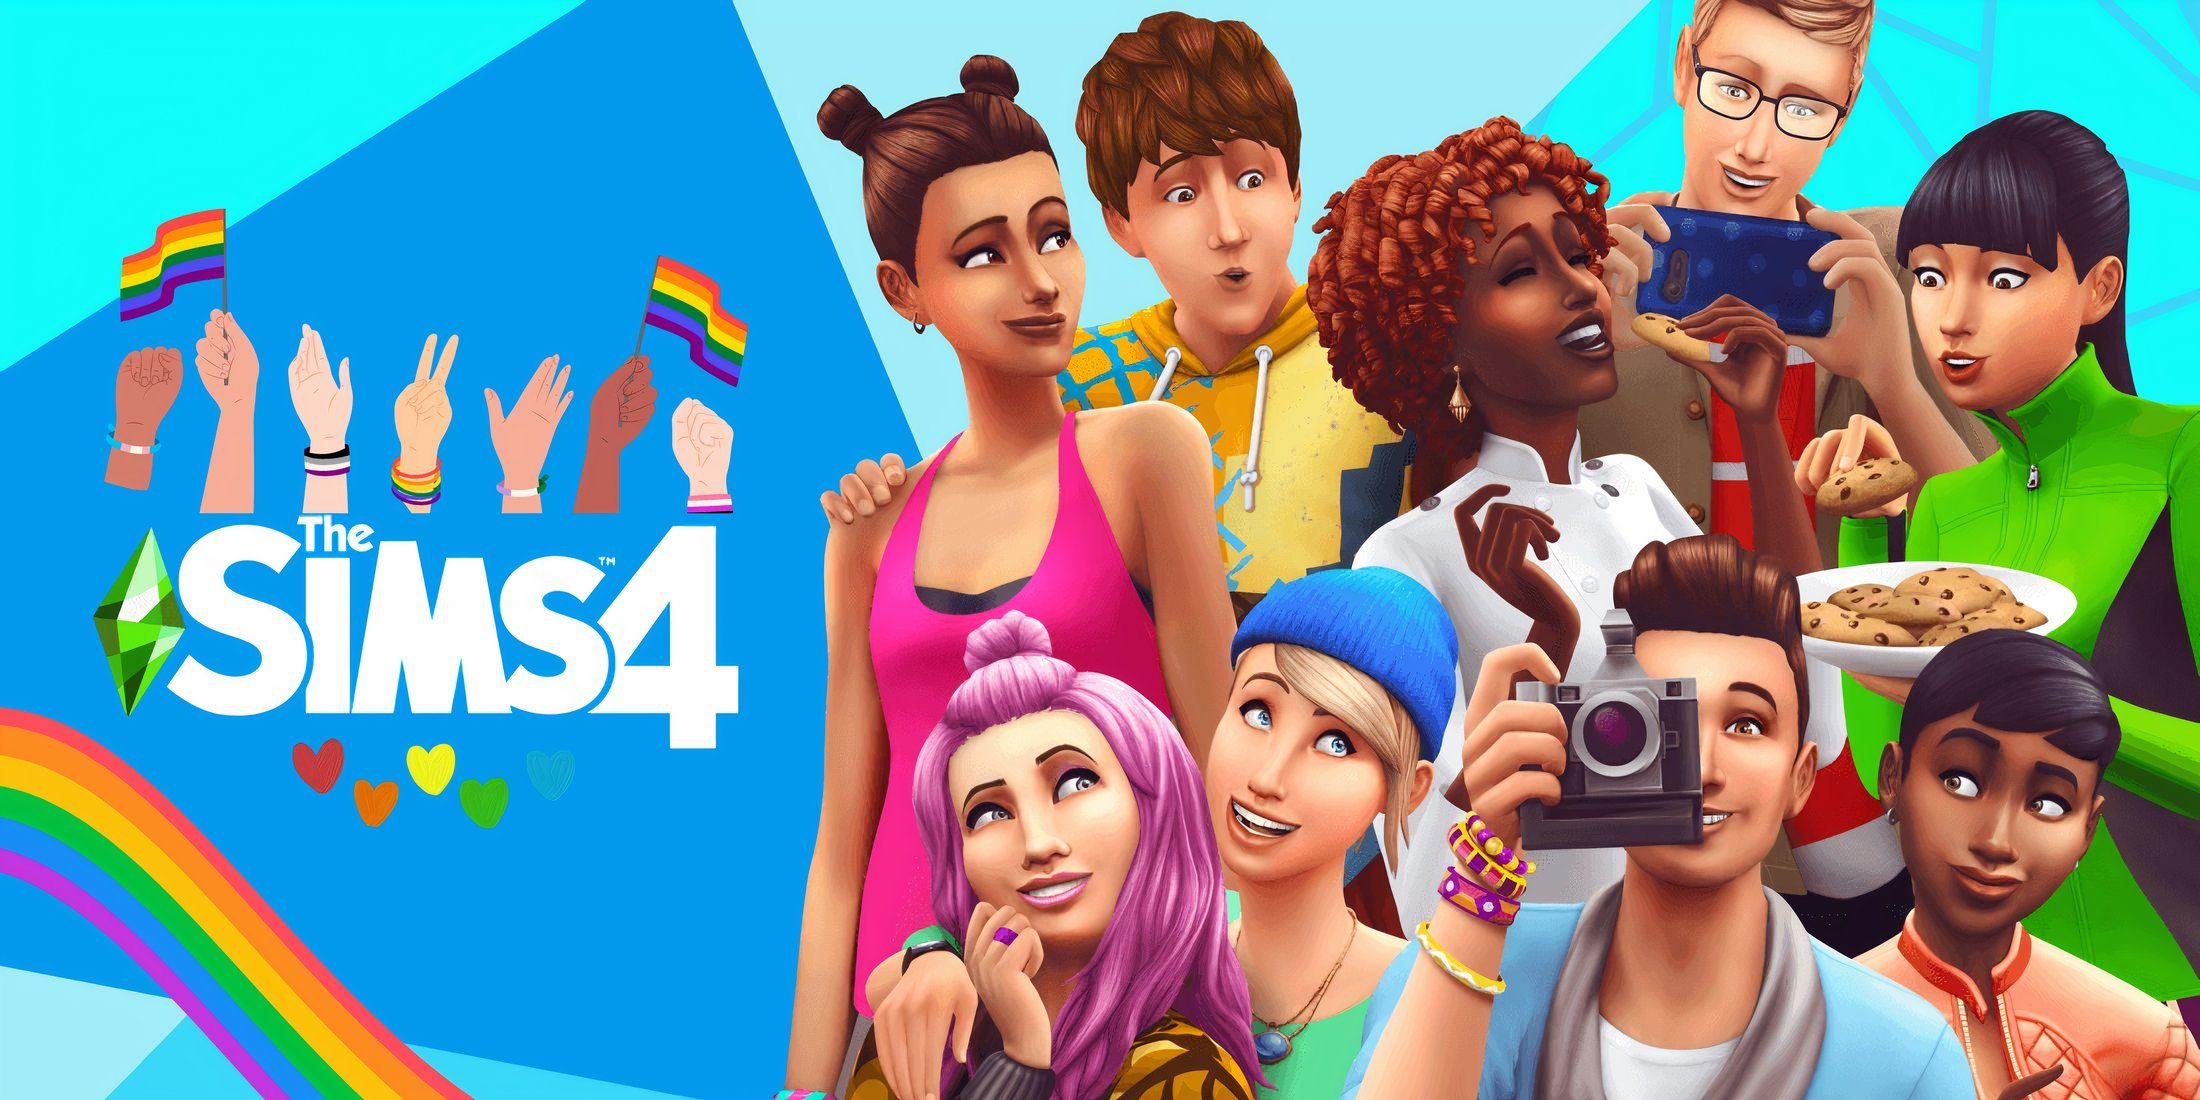 the sims 4 cover art with pride flag.